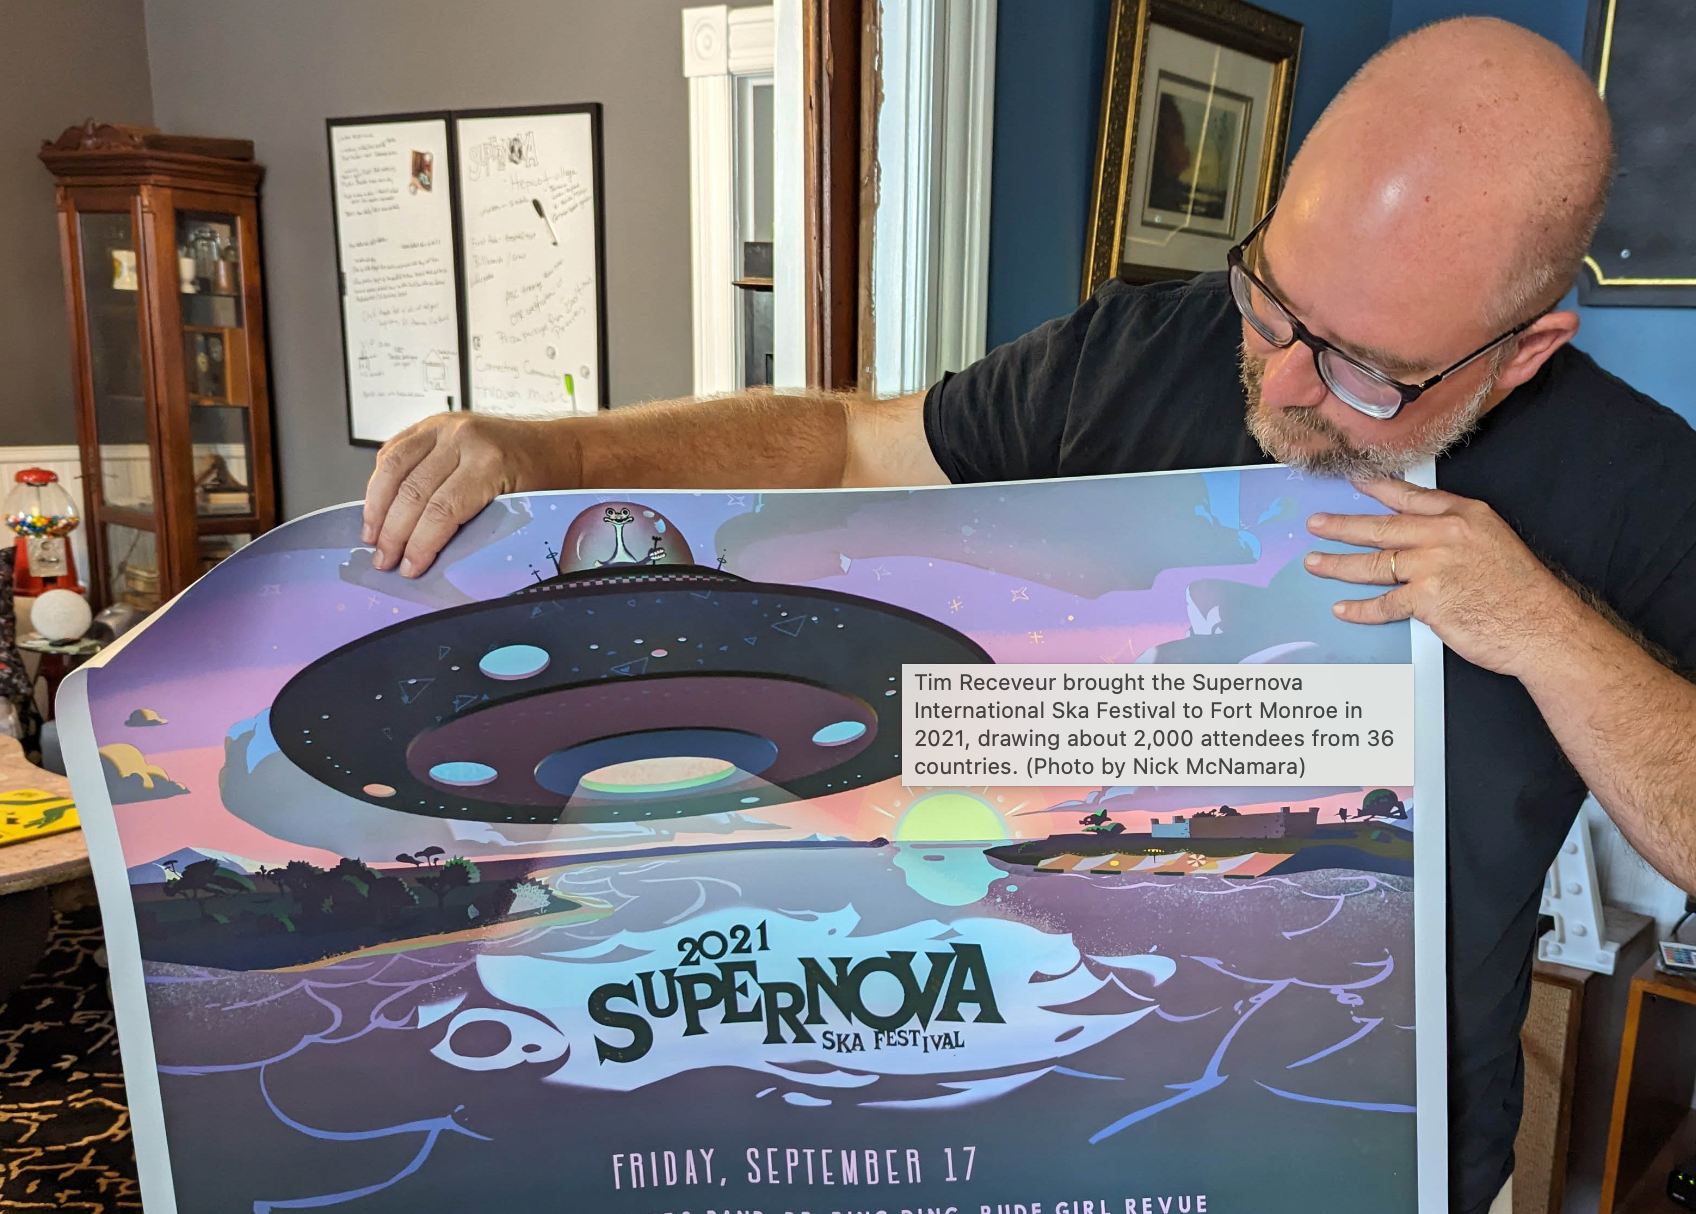 Tim Receveur brought the Supernova International Ska Festival to Fort Monroe in 2021, drawing about 2,000 attendees from 36 countries. (Photo by Nick McNamara)